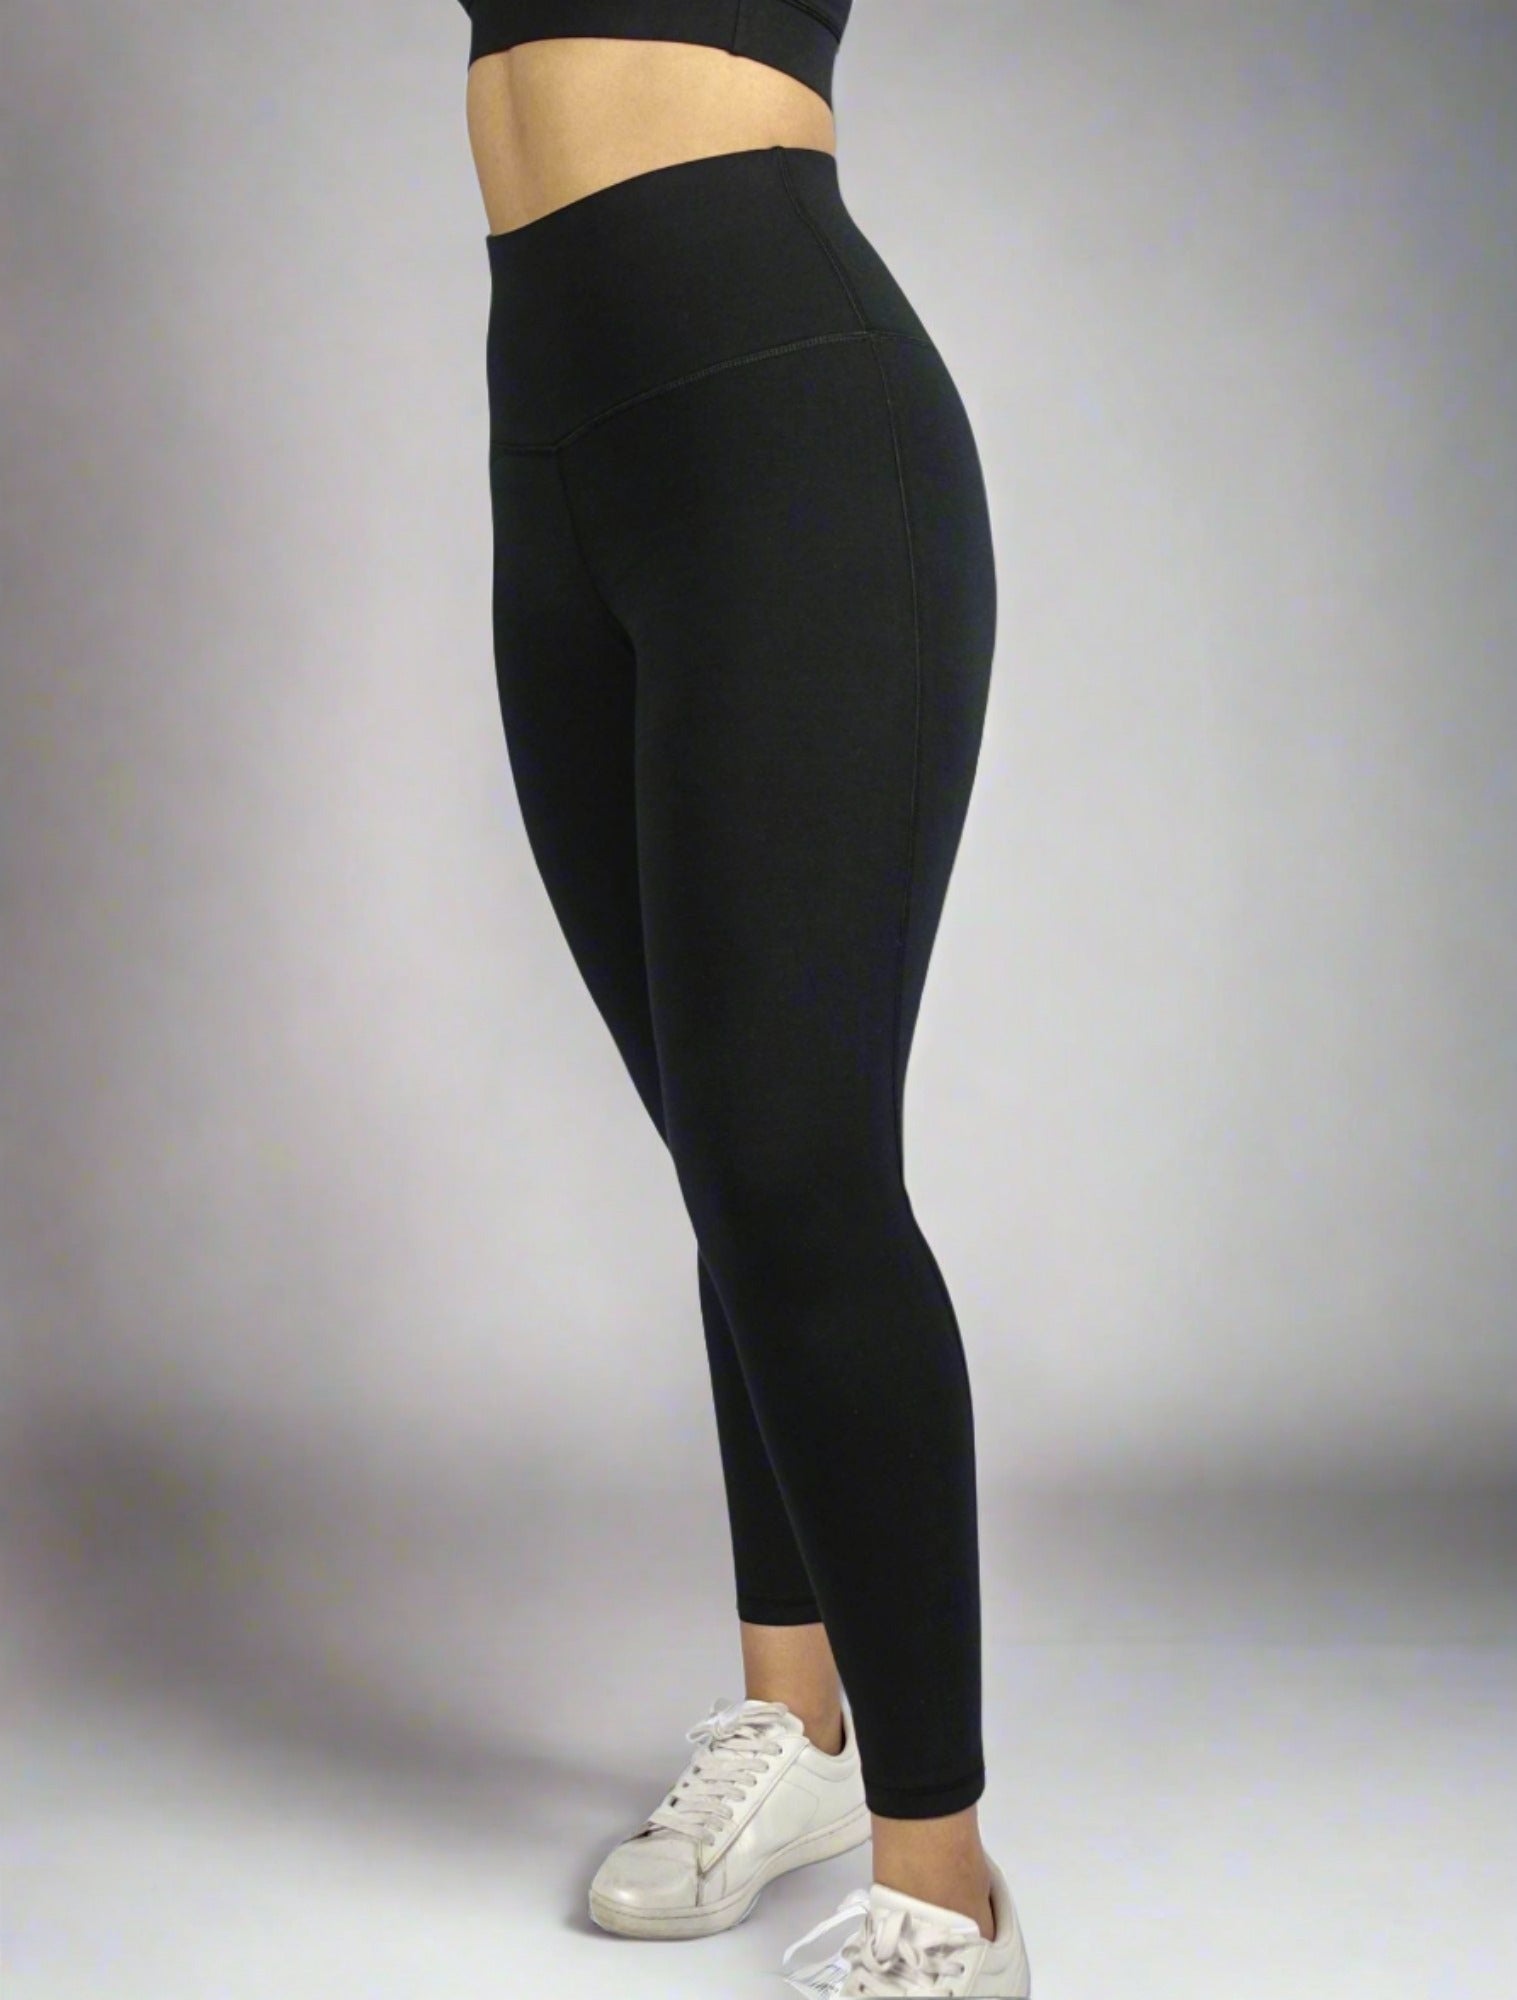 Buy Black Leggings With Pockets for Women, Yoga Pants, 5 High Waist Leggings,  Buttery Soft, One Size, Plus Size, 2XL Leggings, Workout Leggings Online in  India 